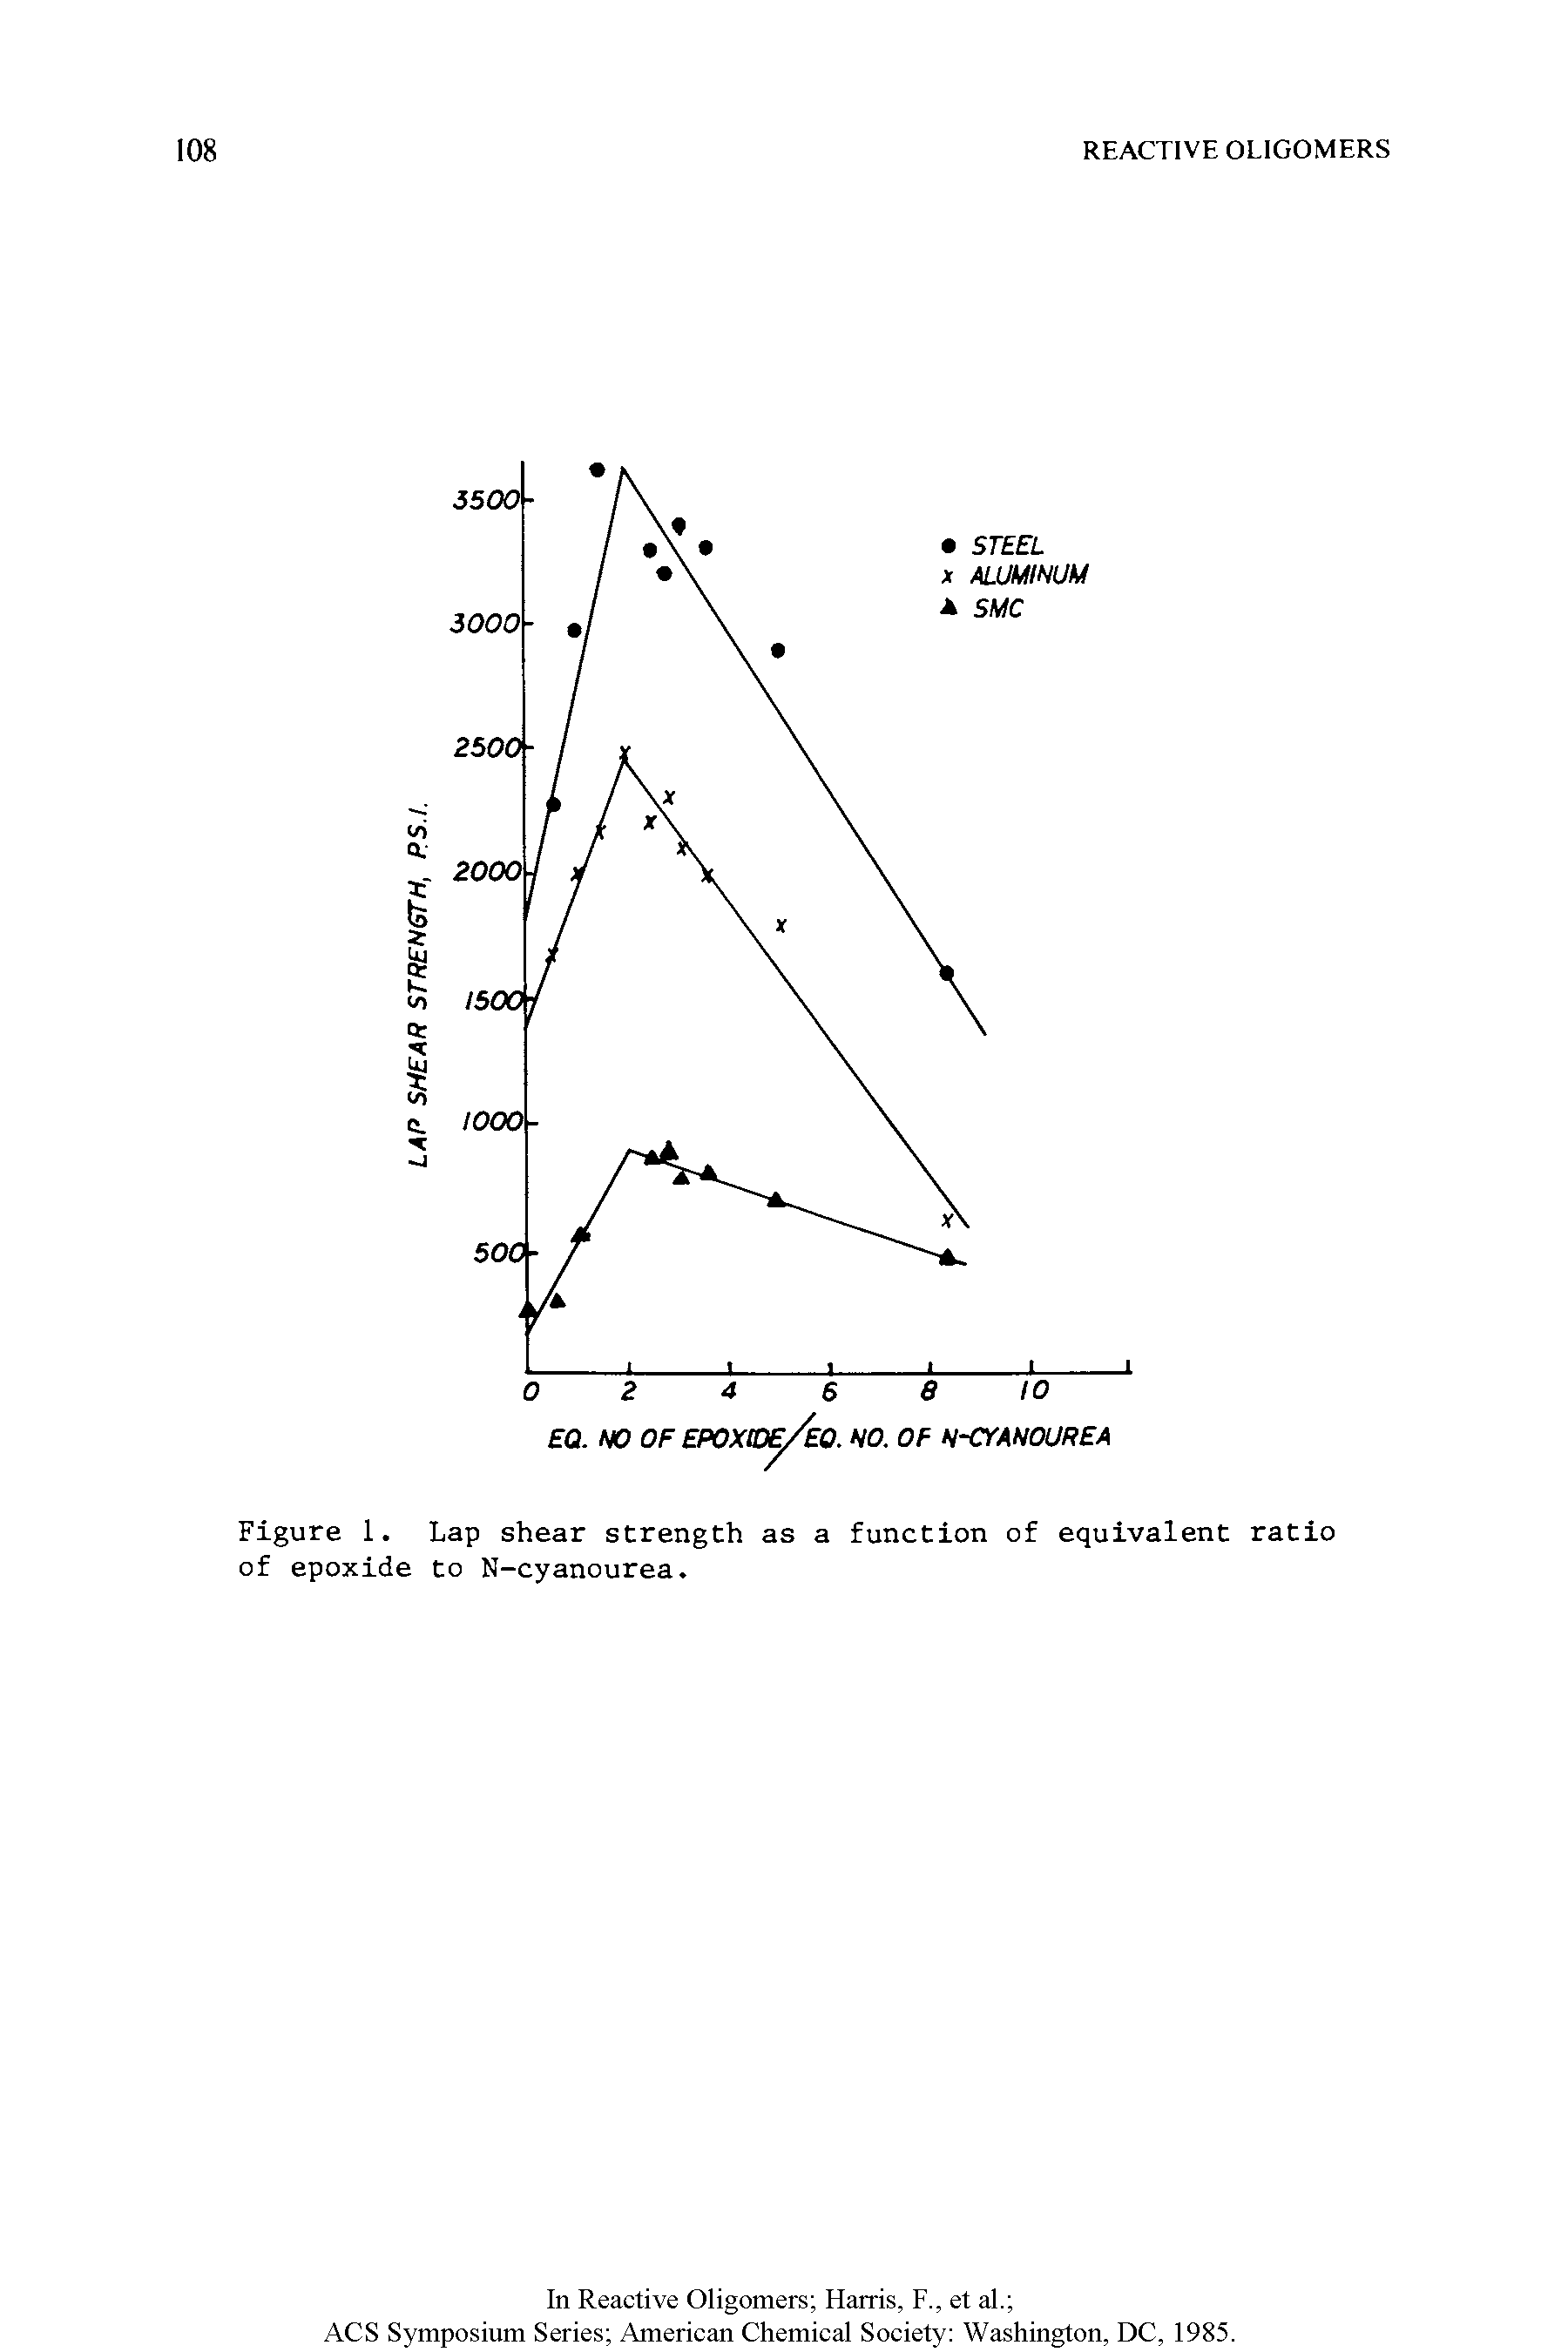 Figure 1. Lap shear strength as a function of equivalent ratio of epoxide to N-cyanourea.